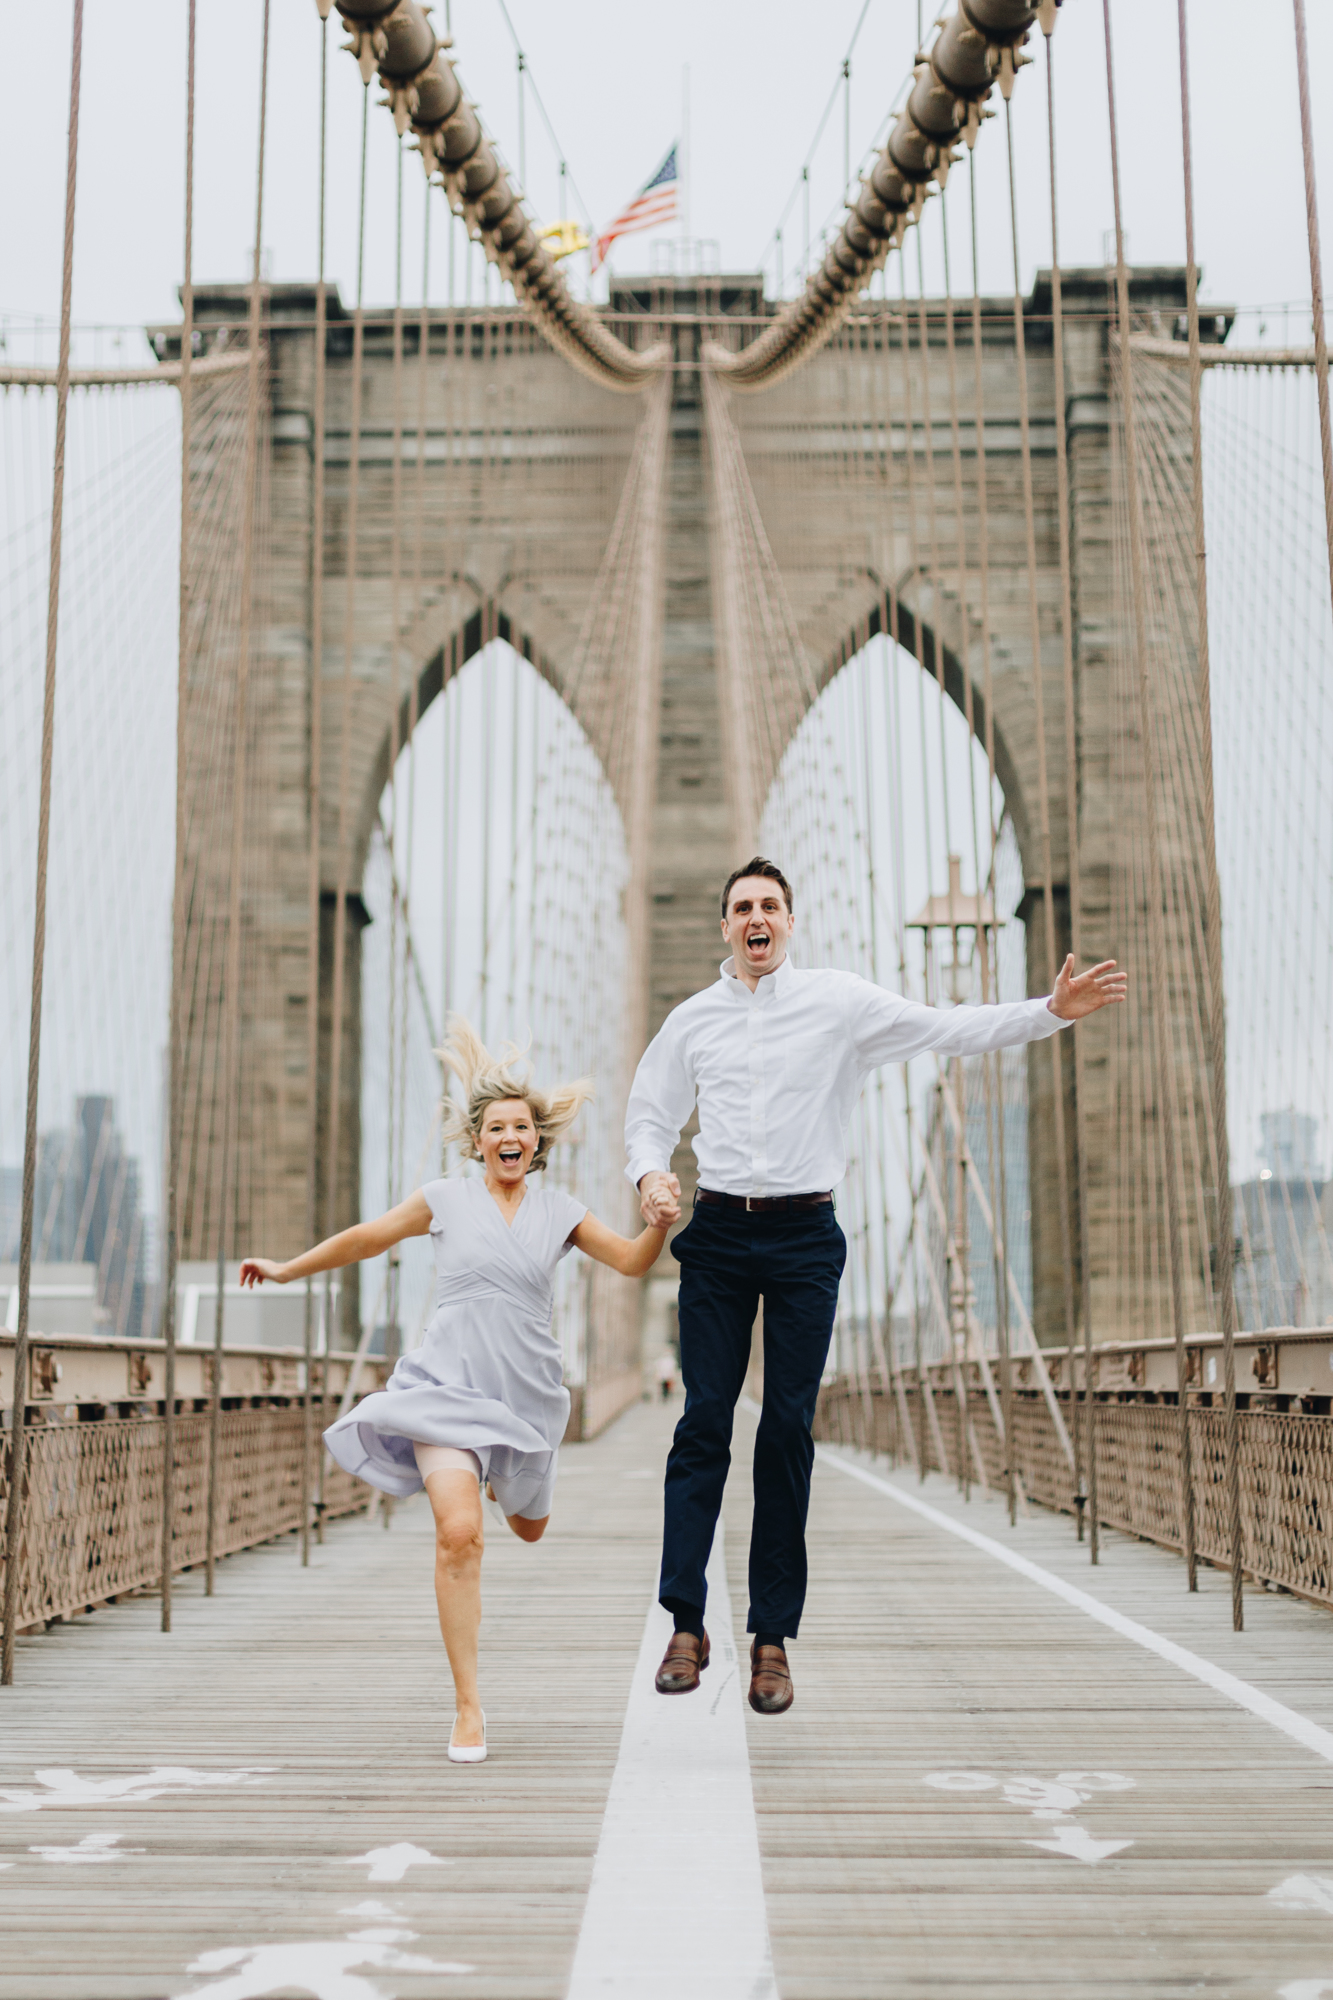 Funny Brooklyn Bridge Park Engagement Photos on a Cloudy Day in New York